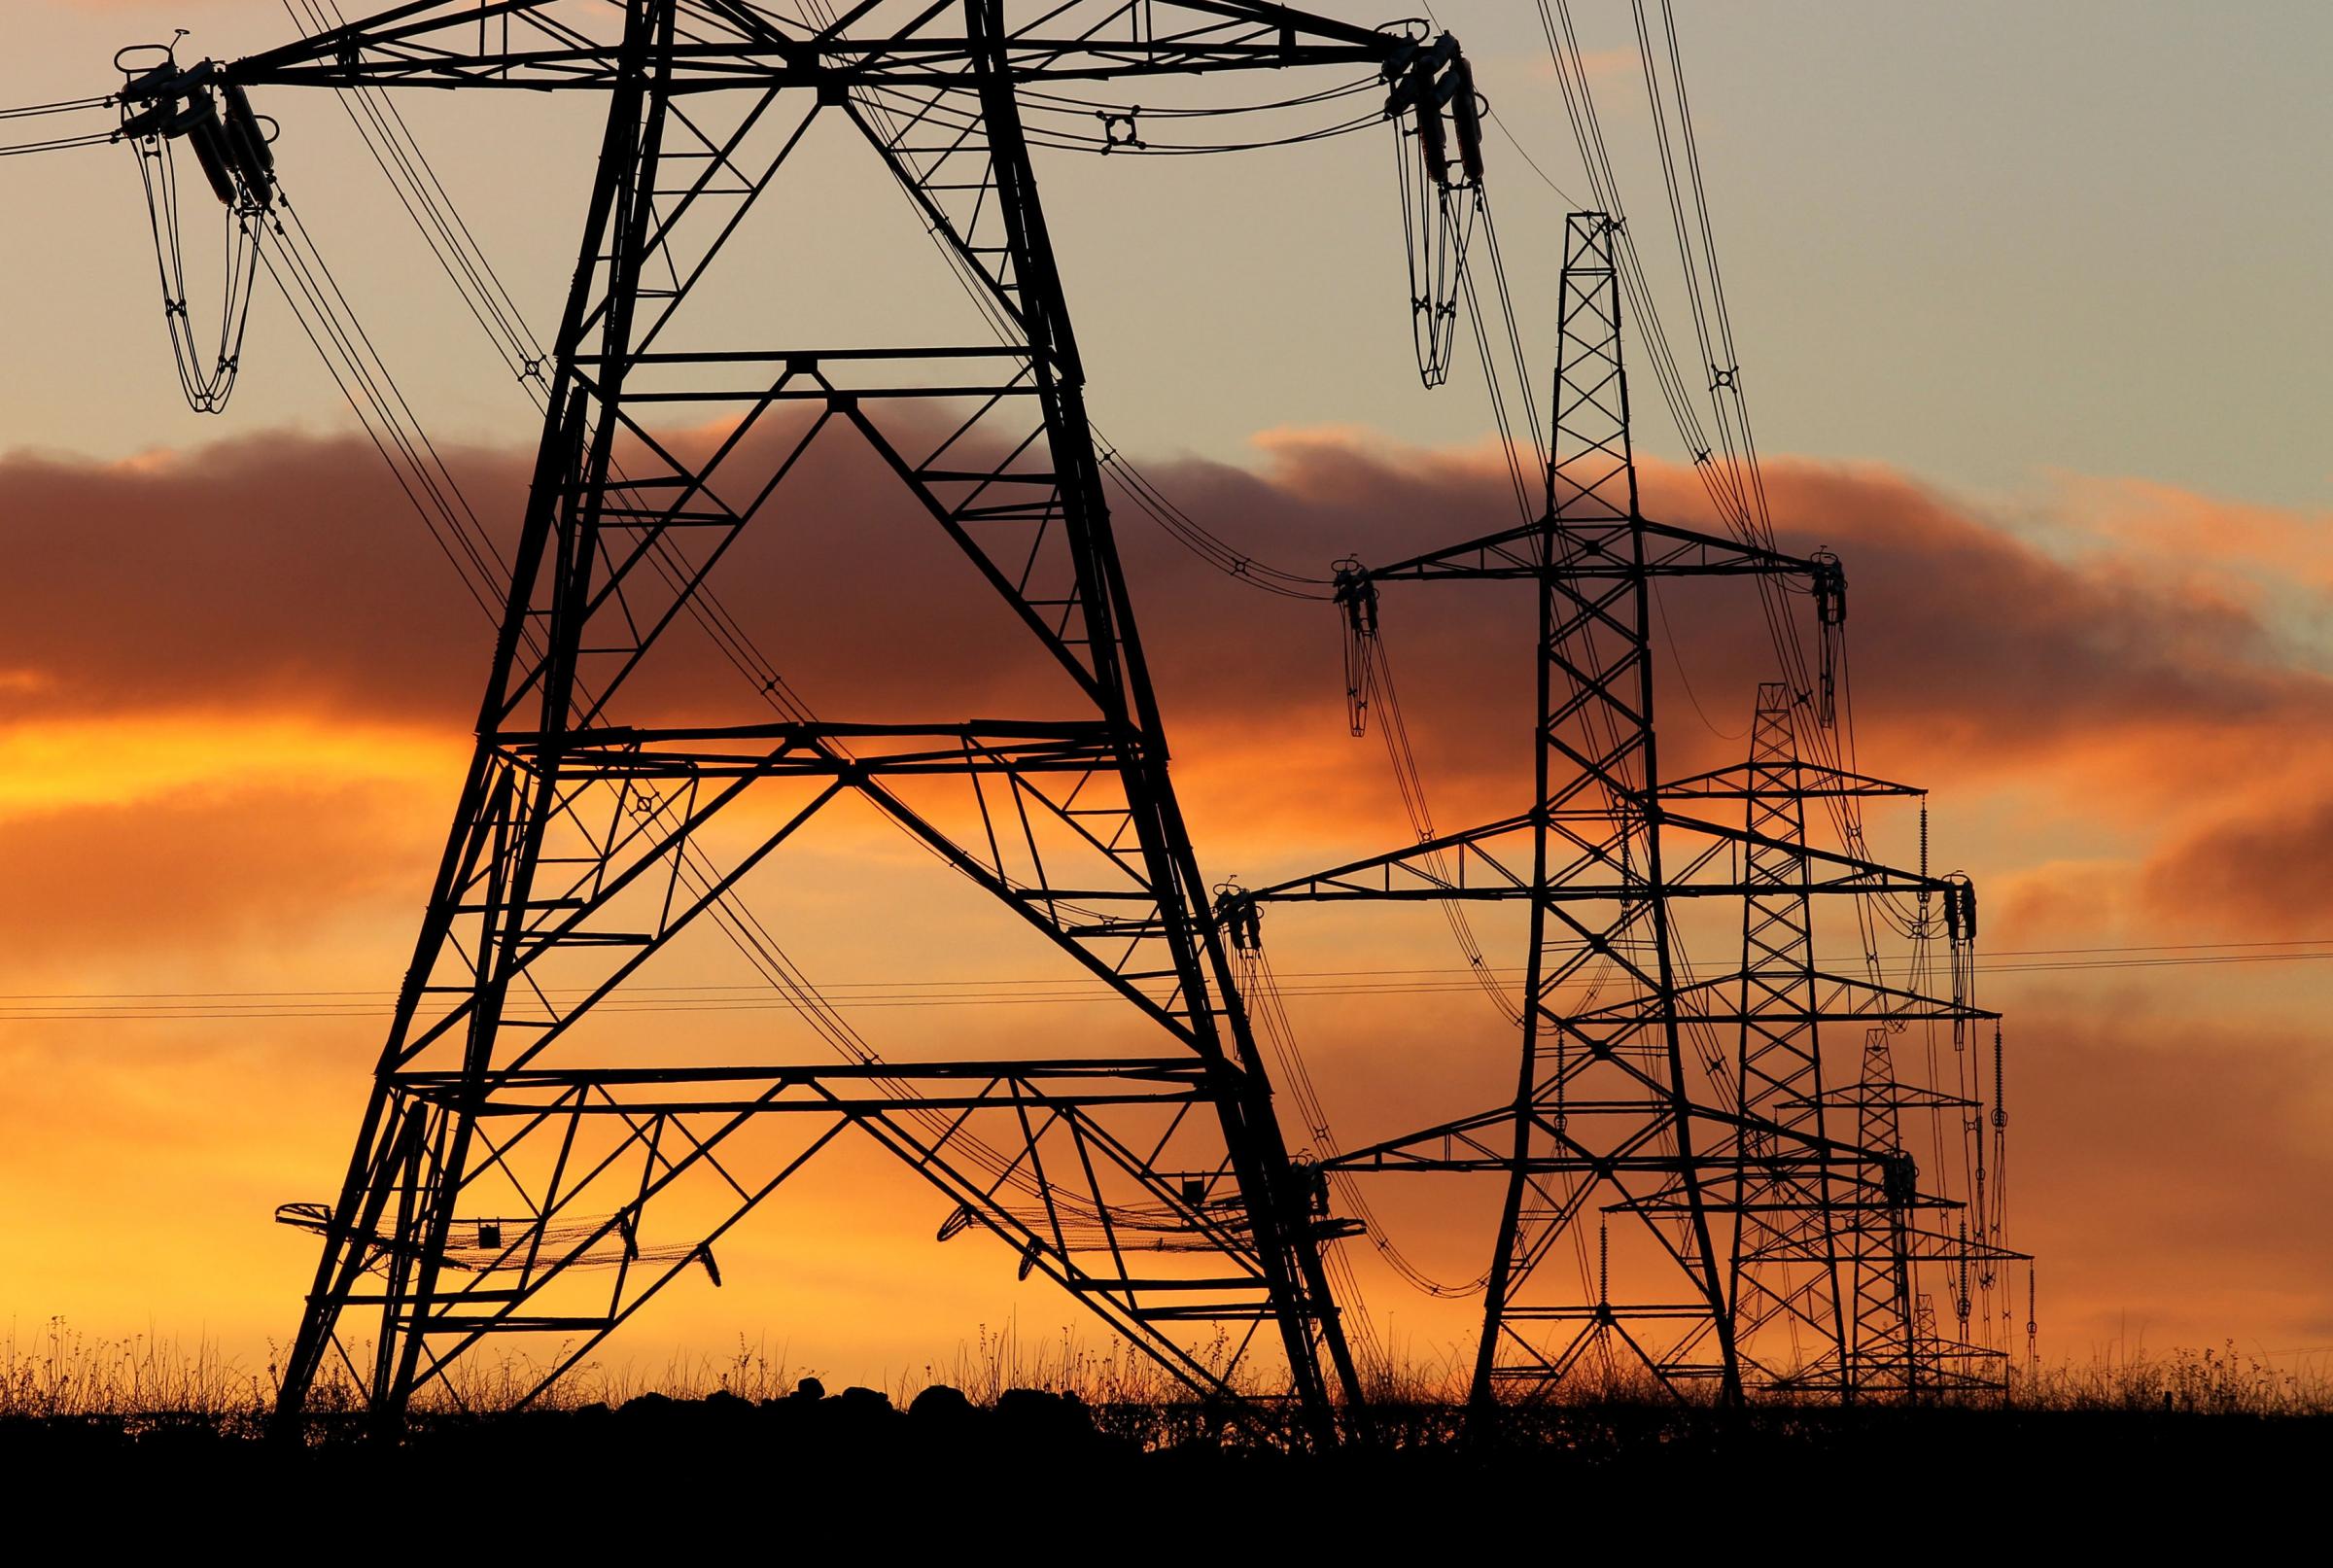 National Grid plc is responsible for the differing standing charges across the UK